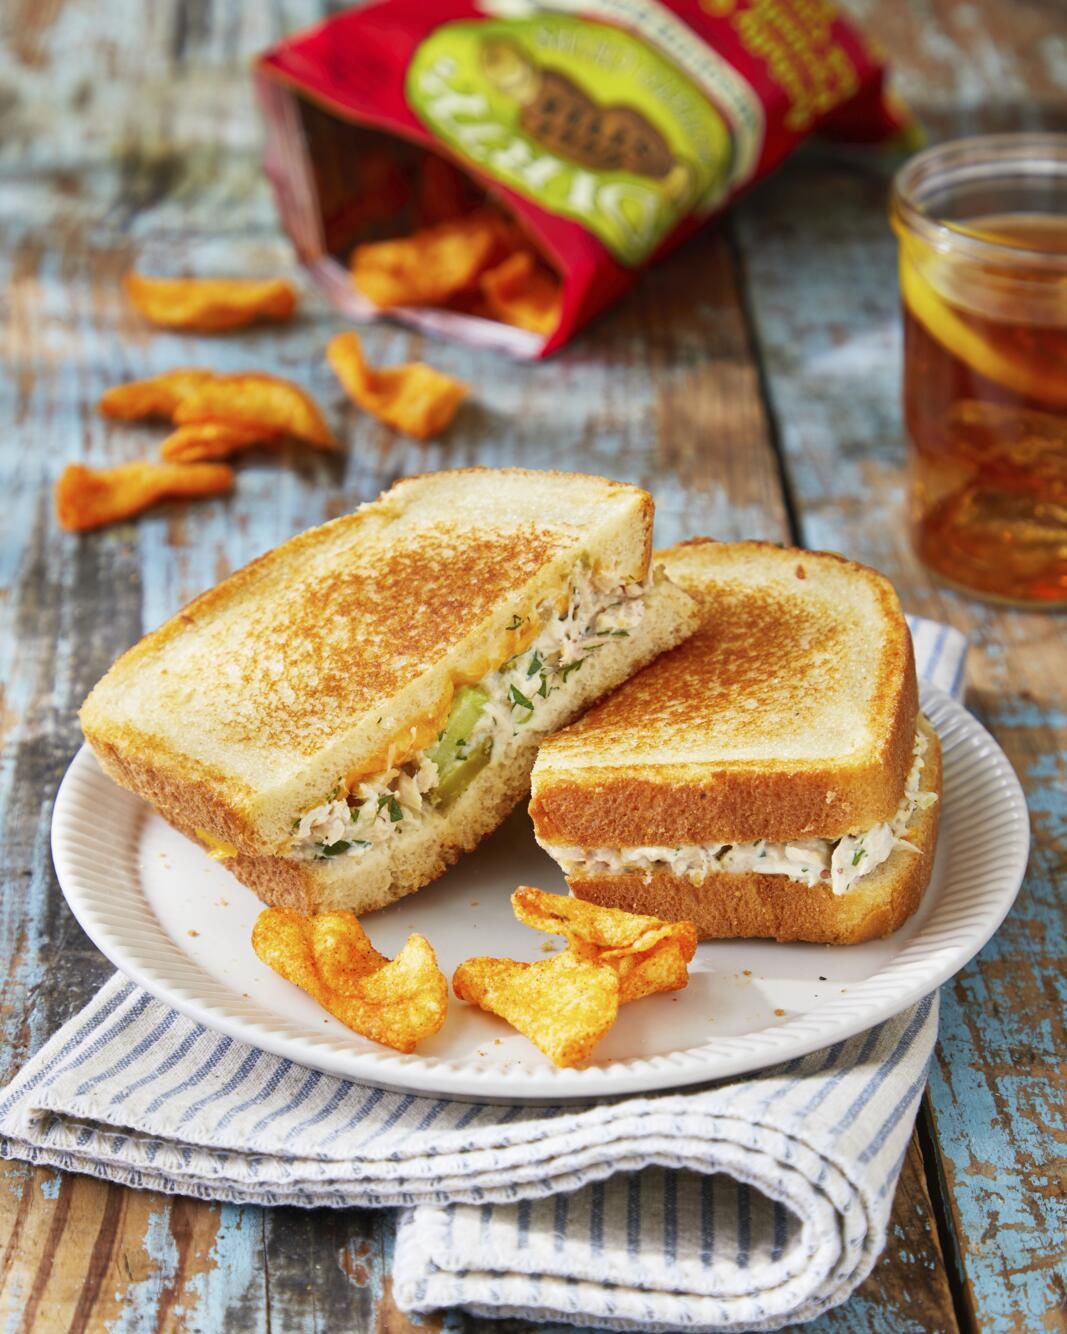 tuna melt sandwich on a plate with some chips